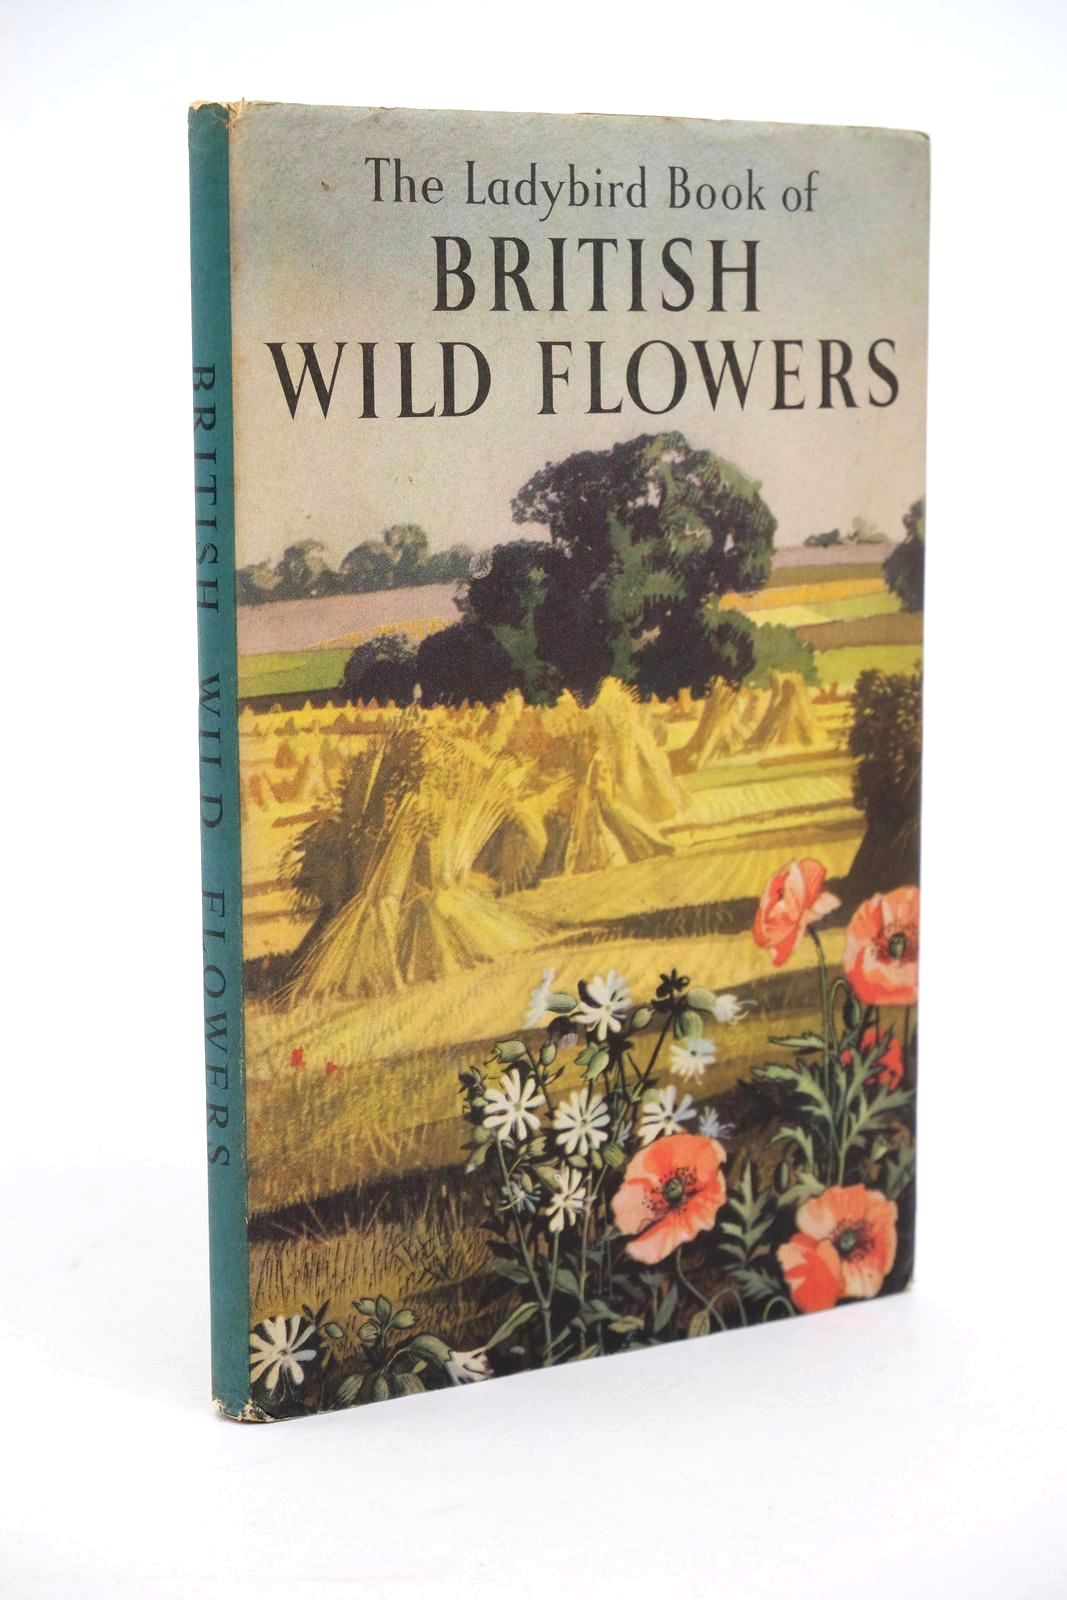 Photo of THE LADYBIRD BOOK OF BRITISH WILD FLOWERS written by Vesey-Fitzgerald, Brian illustrated by Hilder, Rowland
Hilder, Edith published by Wills & Hepworth Ltd. (STOCK CODE: 1323139)  for sale by Stella & Rose's Books